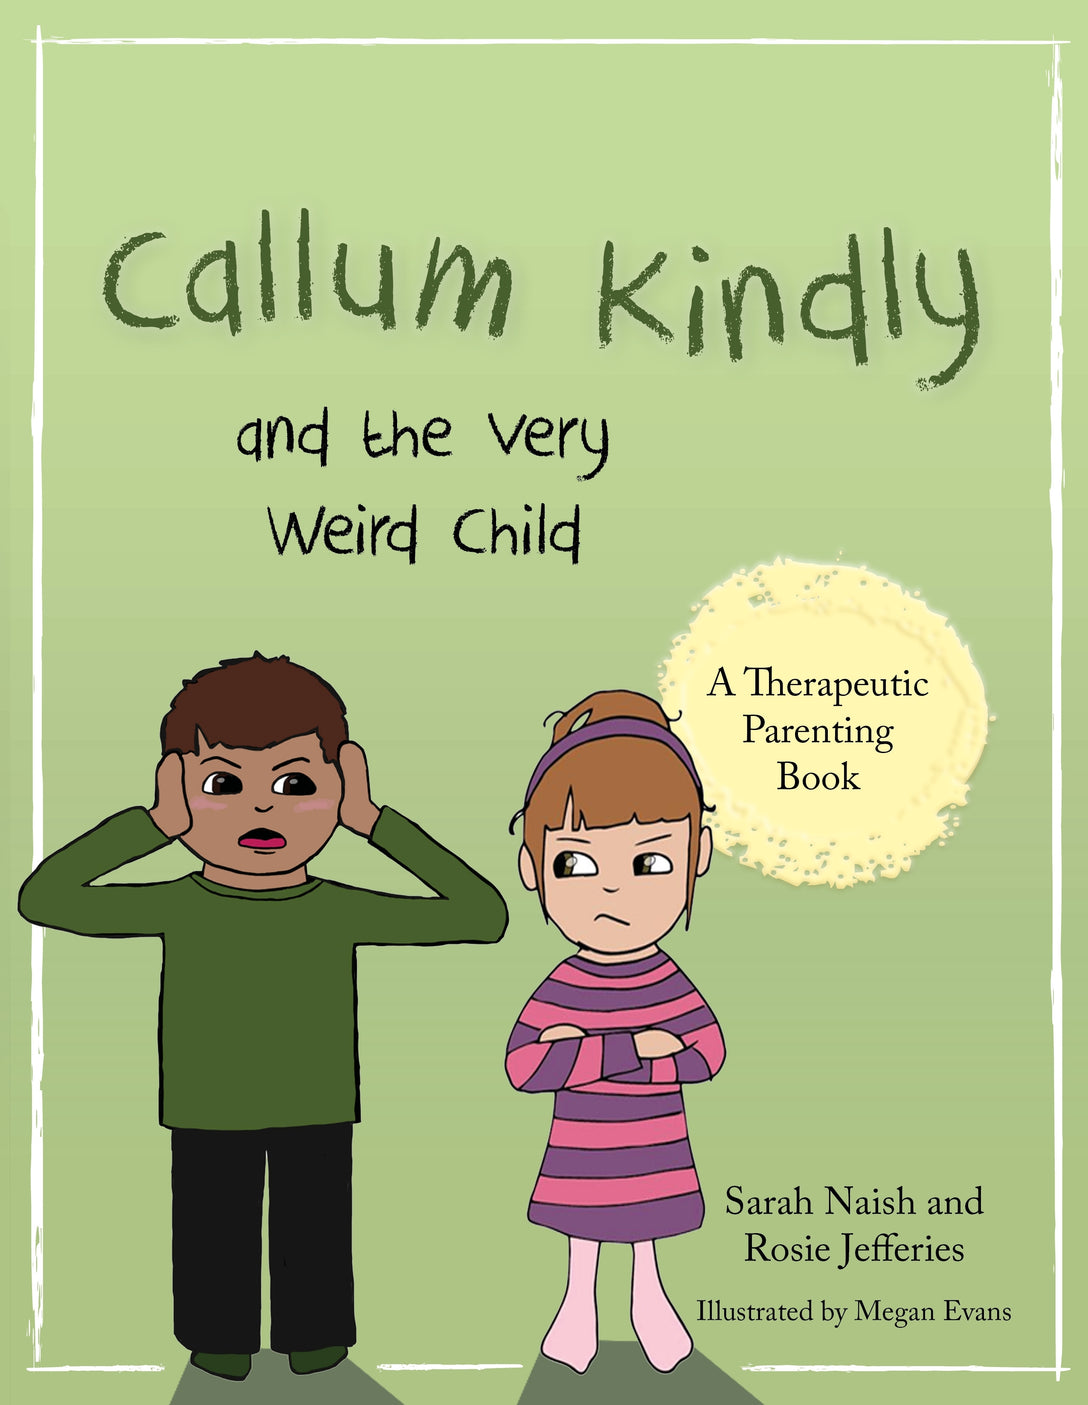 Callum Kindly and the Very Weird Child by Sarah Naish, Rosie Jefferies, Megan Evans